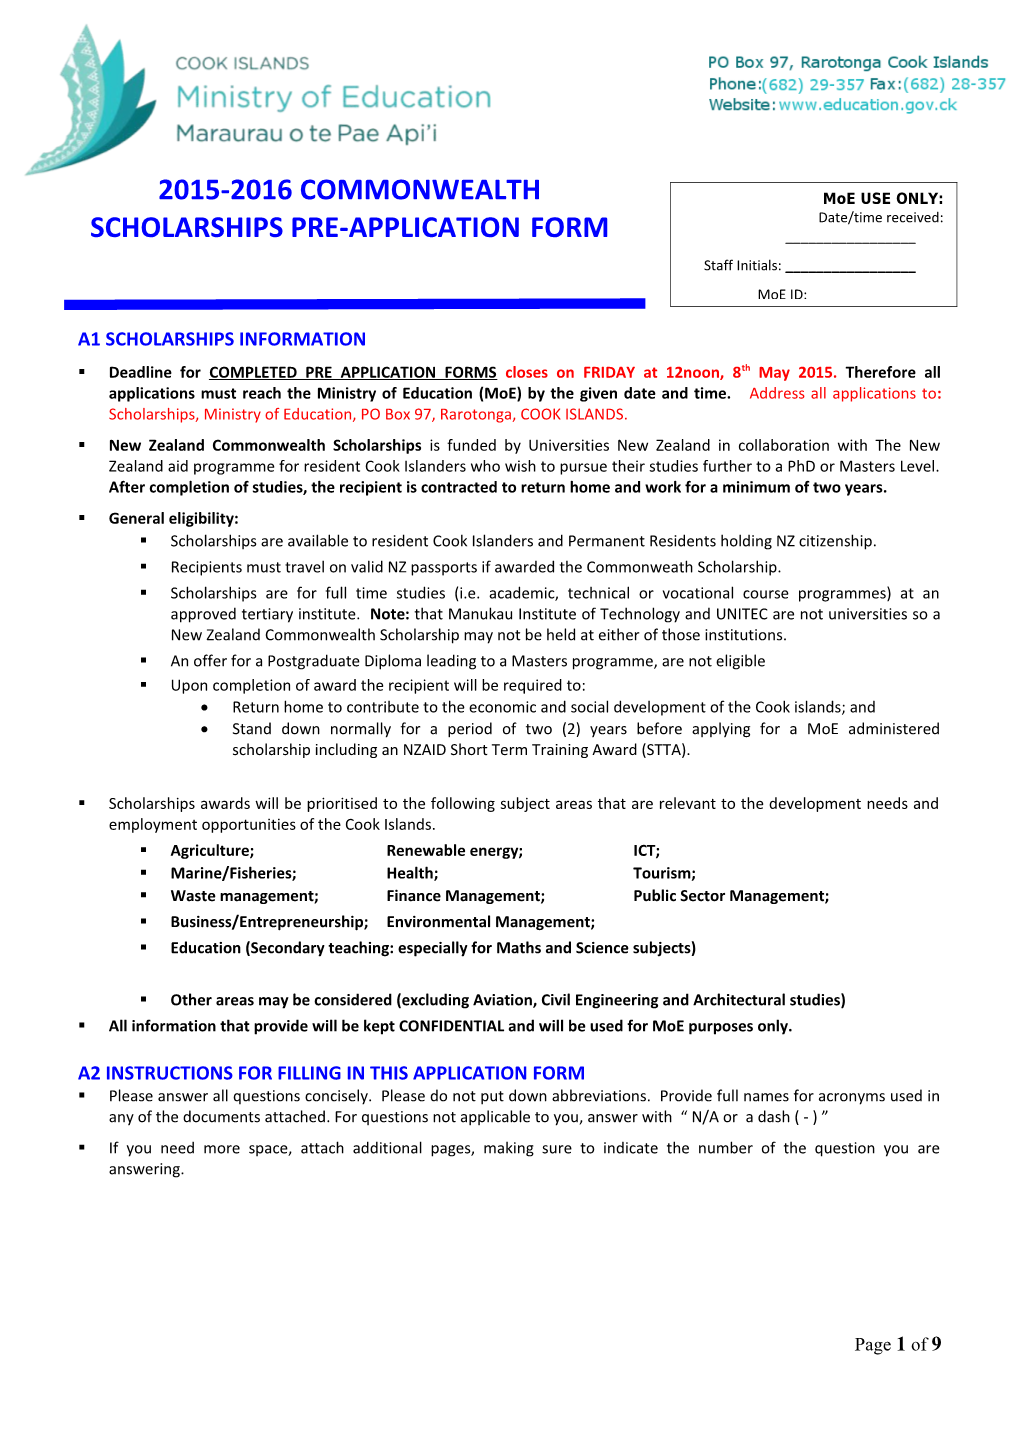 A1 Scholarships Information